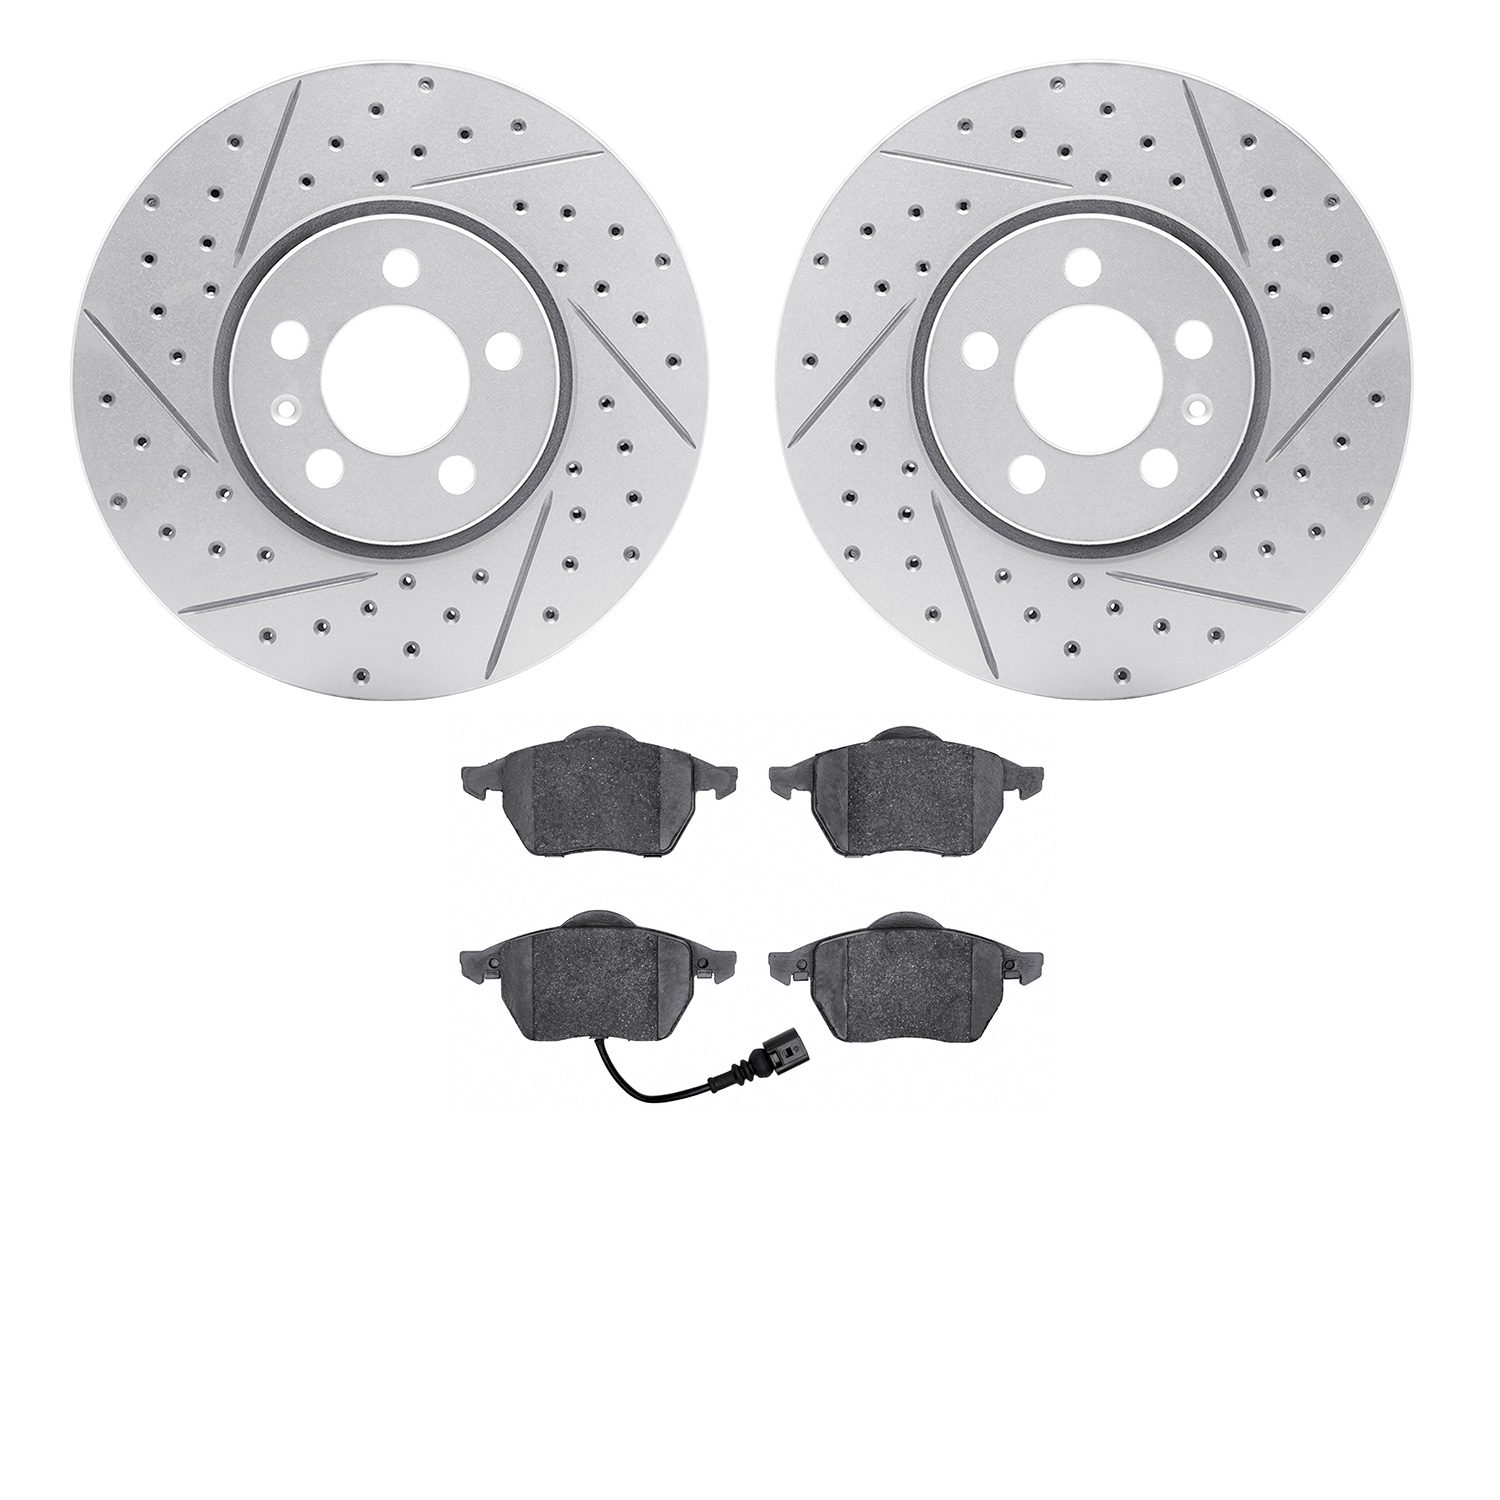 2502-74021 Geoperformance Drilled/Slotted Rotors w/5000 Advanced Brake Pads Kit, 1999-2010 Audi/Volkswagen, Position: Front